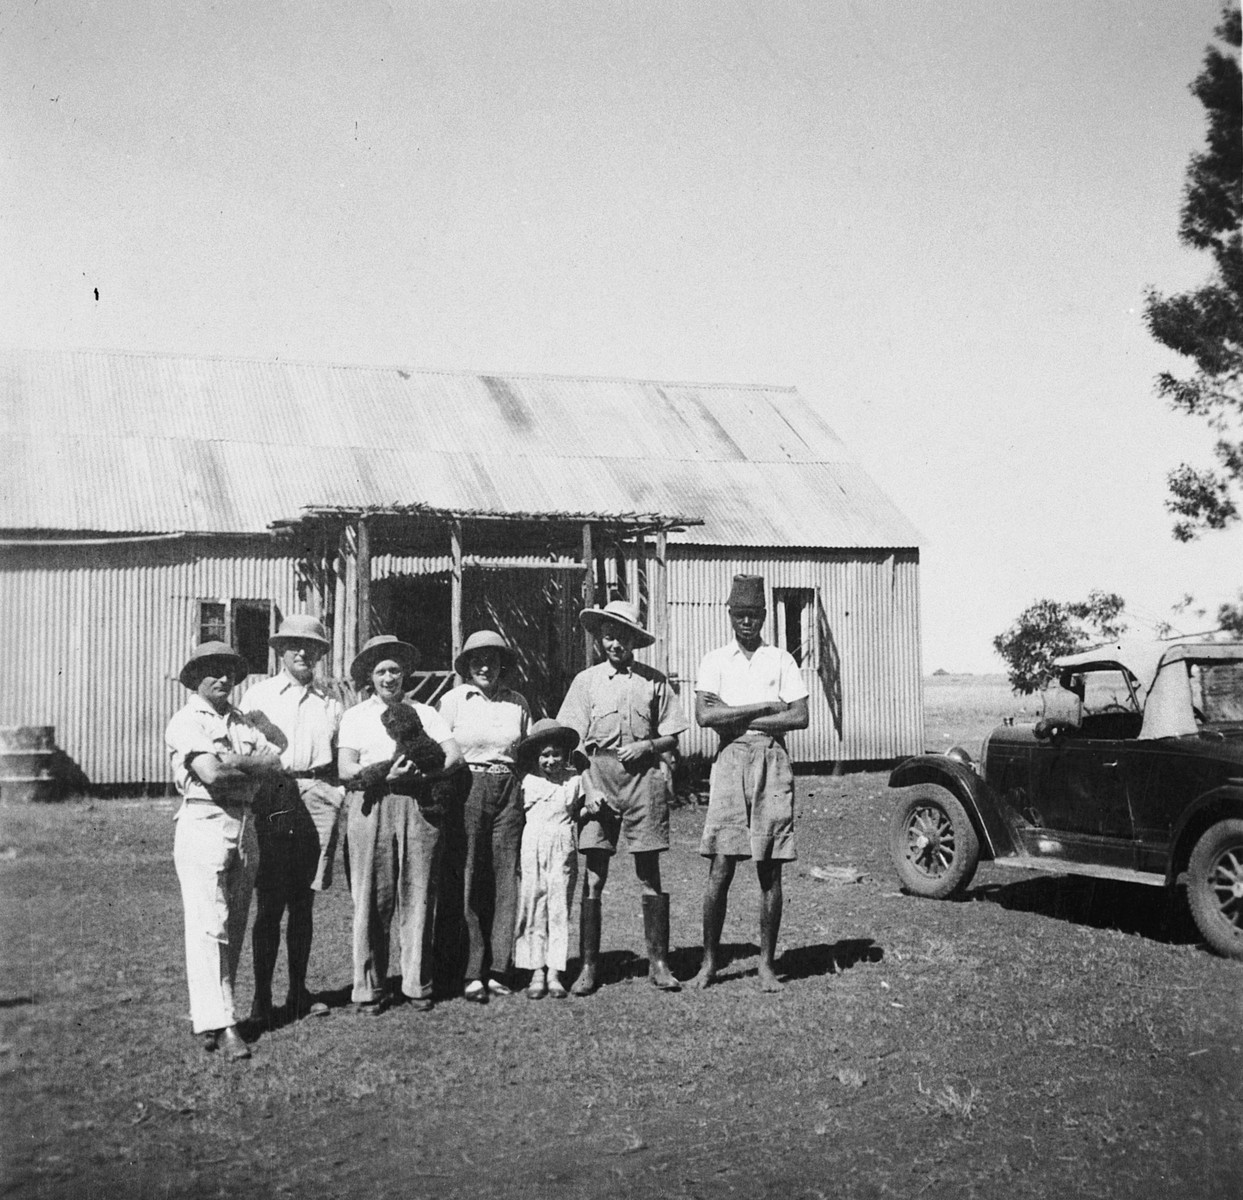 Members of a Jewish refugee family pose with an African assistant on their farm in Kenya.

Pictured are members of the Zweig family.  Stefanie Zweig is third from the right.